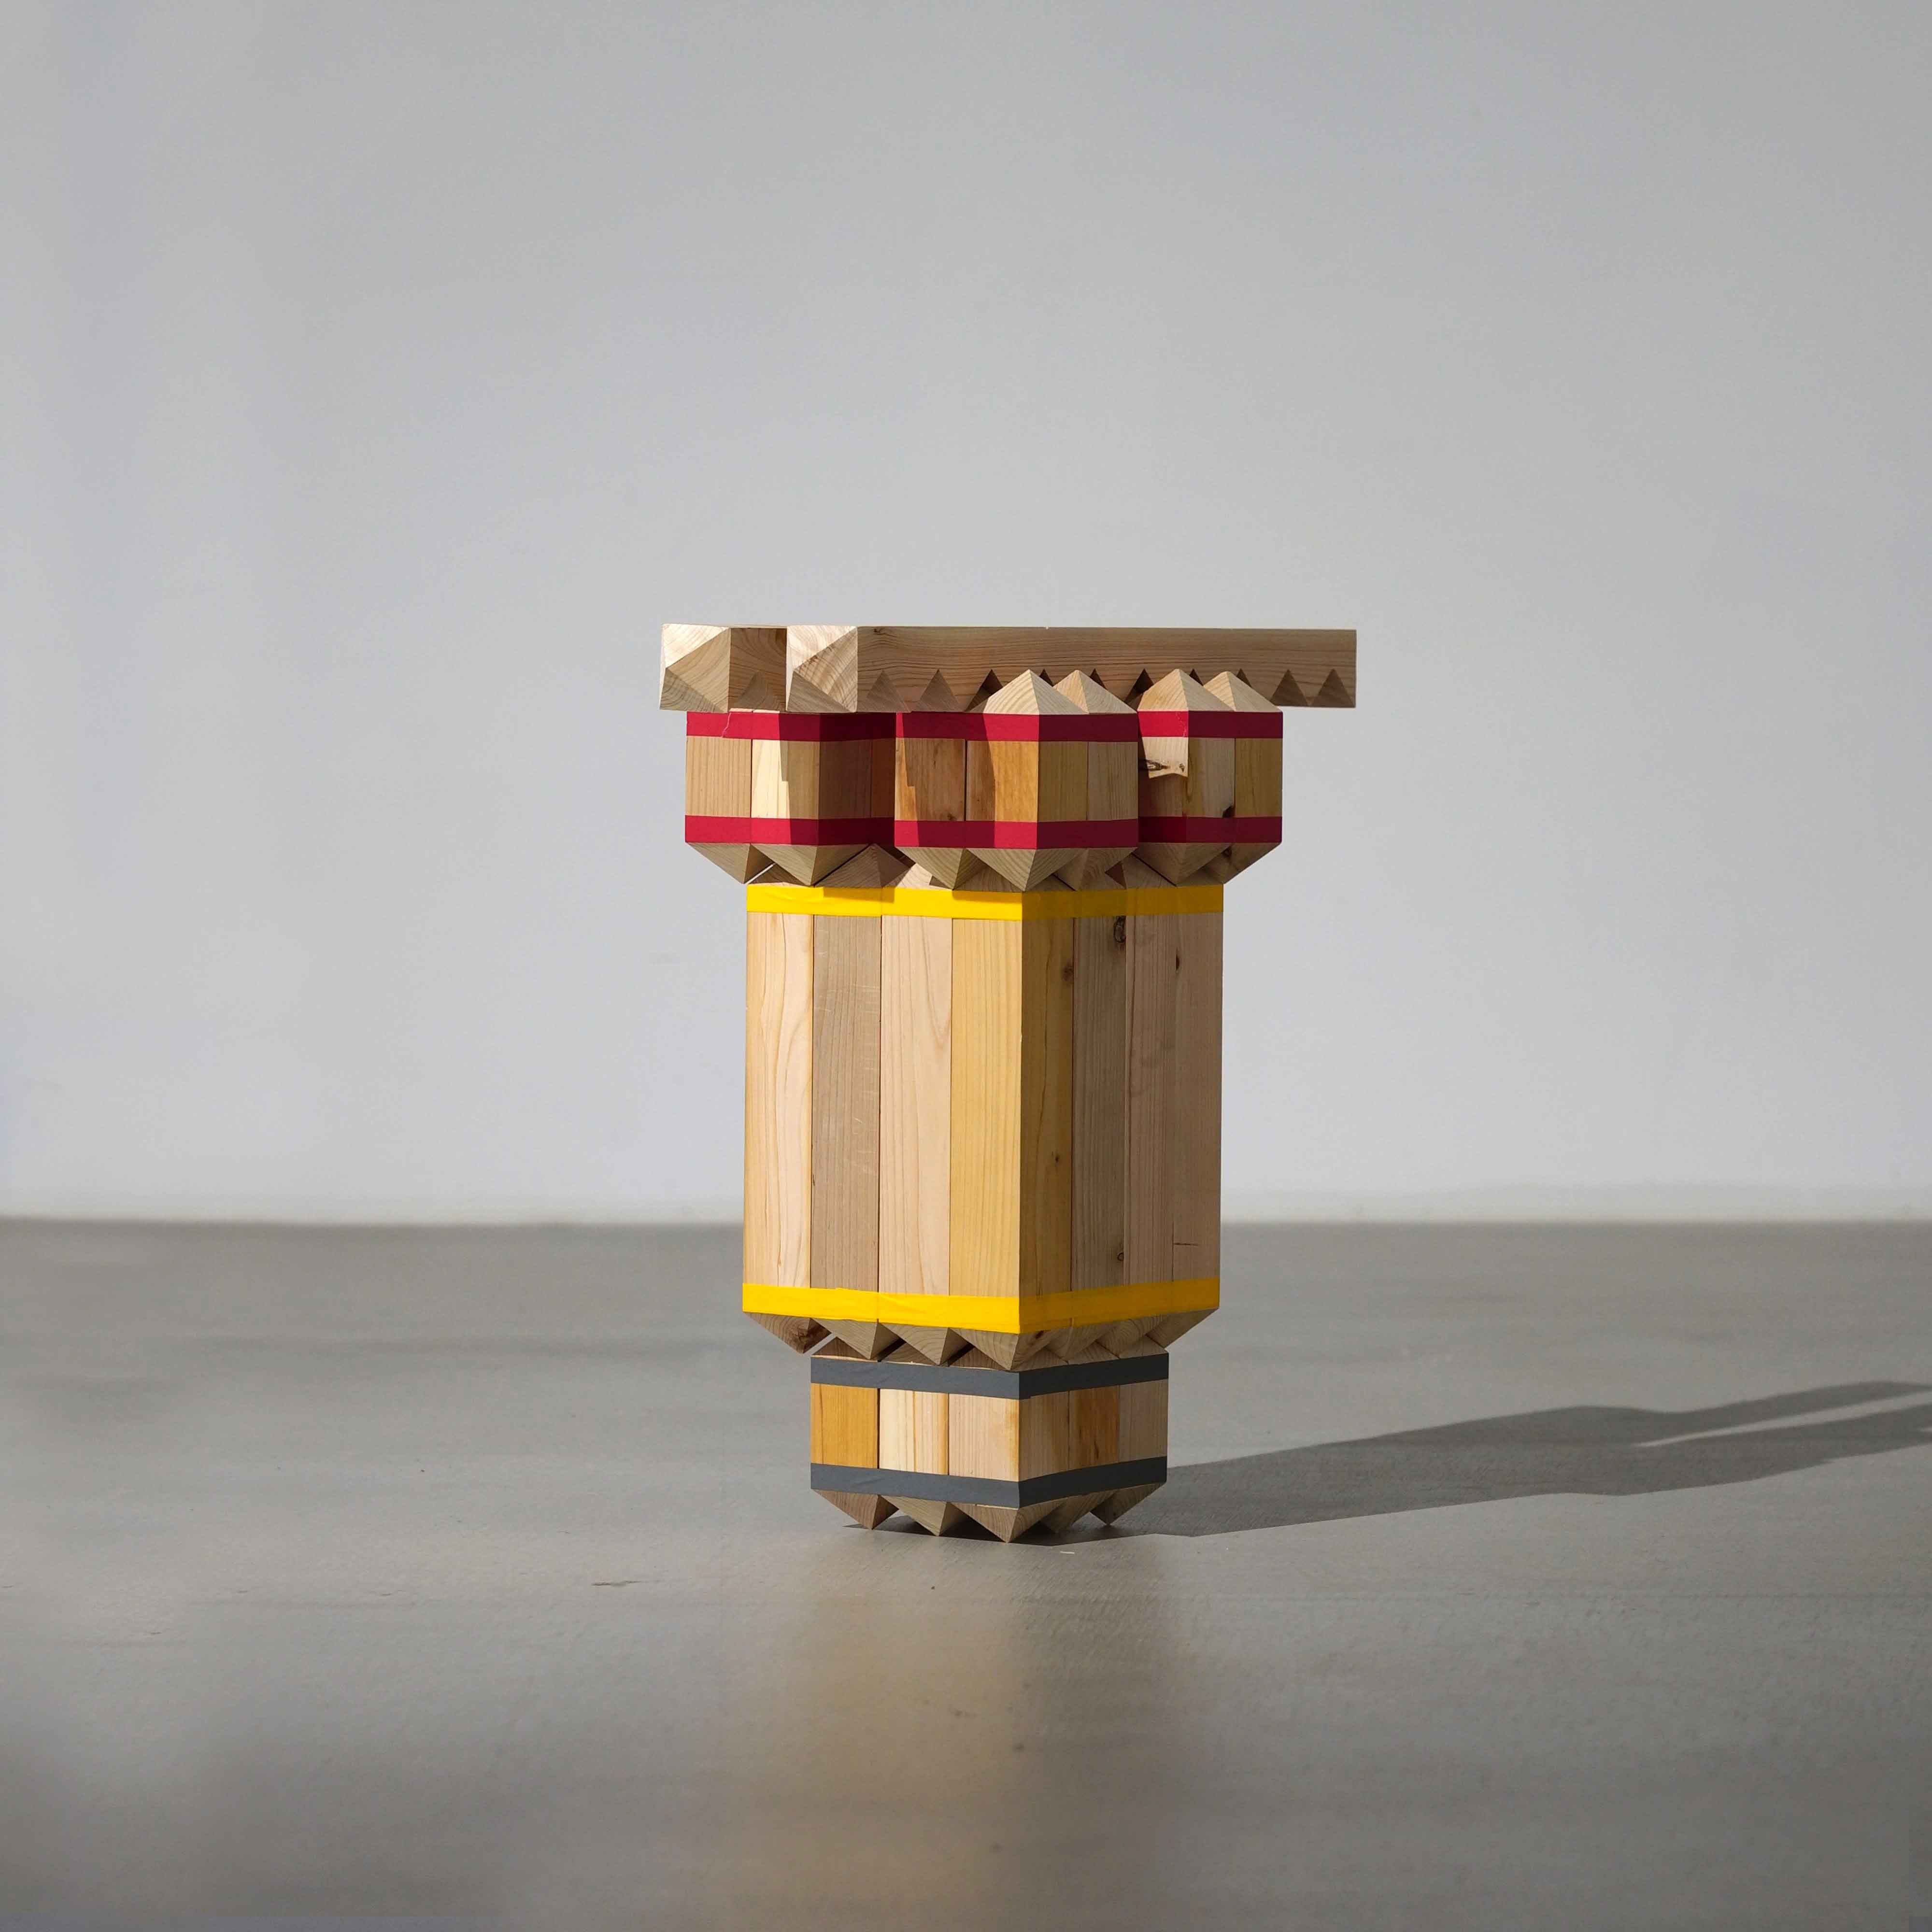 deku-by-takuto-ohta-comprises-wooden-blocks-stacked-in-different-configurations